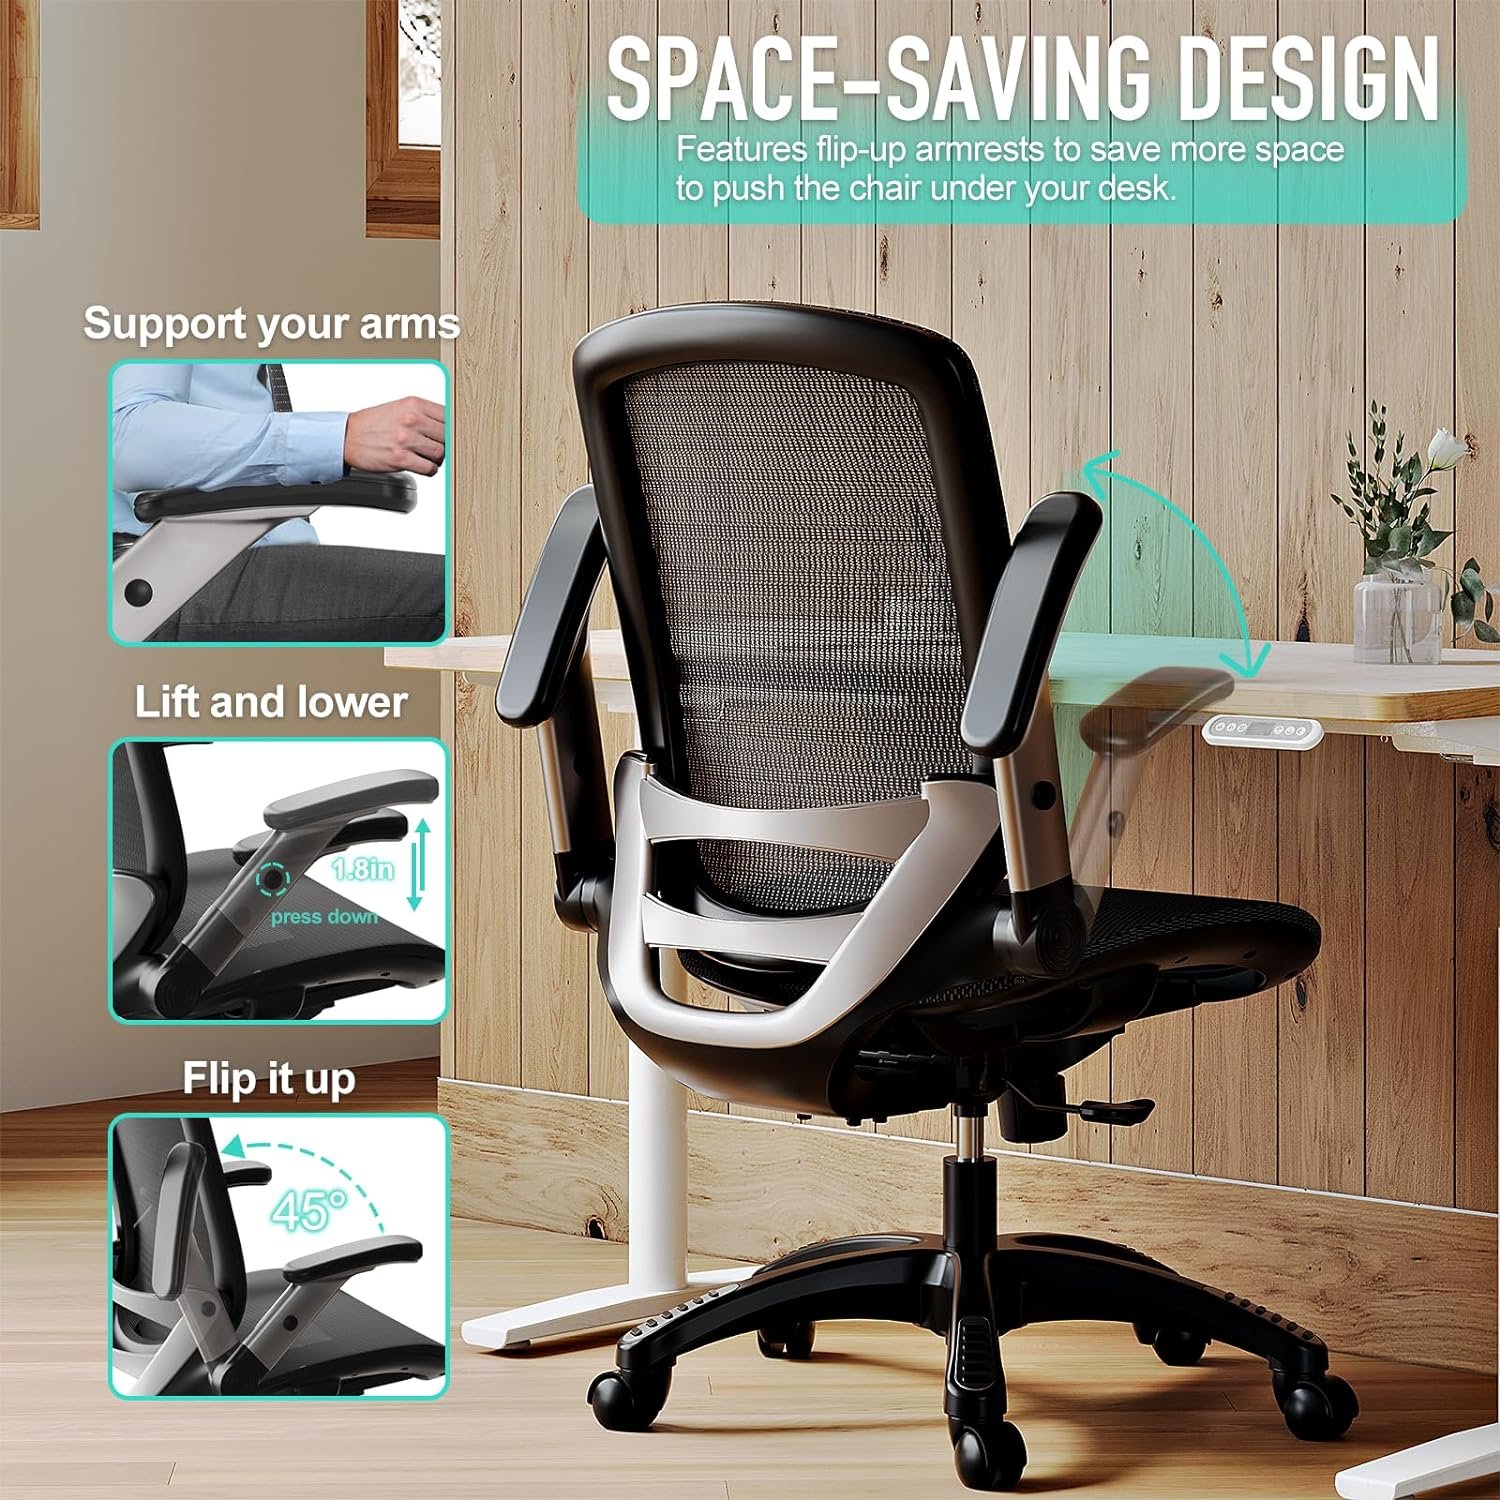 GABRYLLY Ergonomic Office Chair, Mesh Desk Chair - Lumbar Support and Adjustable Flip-up Arms, Soft Wide Seat, 90-120° Tilt, High Back Home Ergonomic Chairs Swivel Task Chair, Easy Assemble